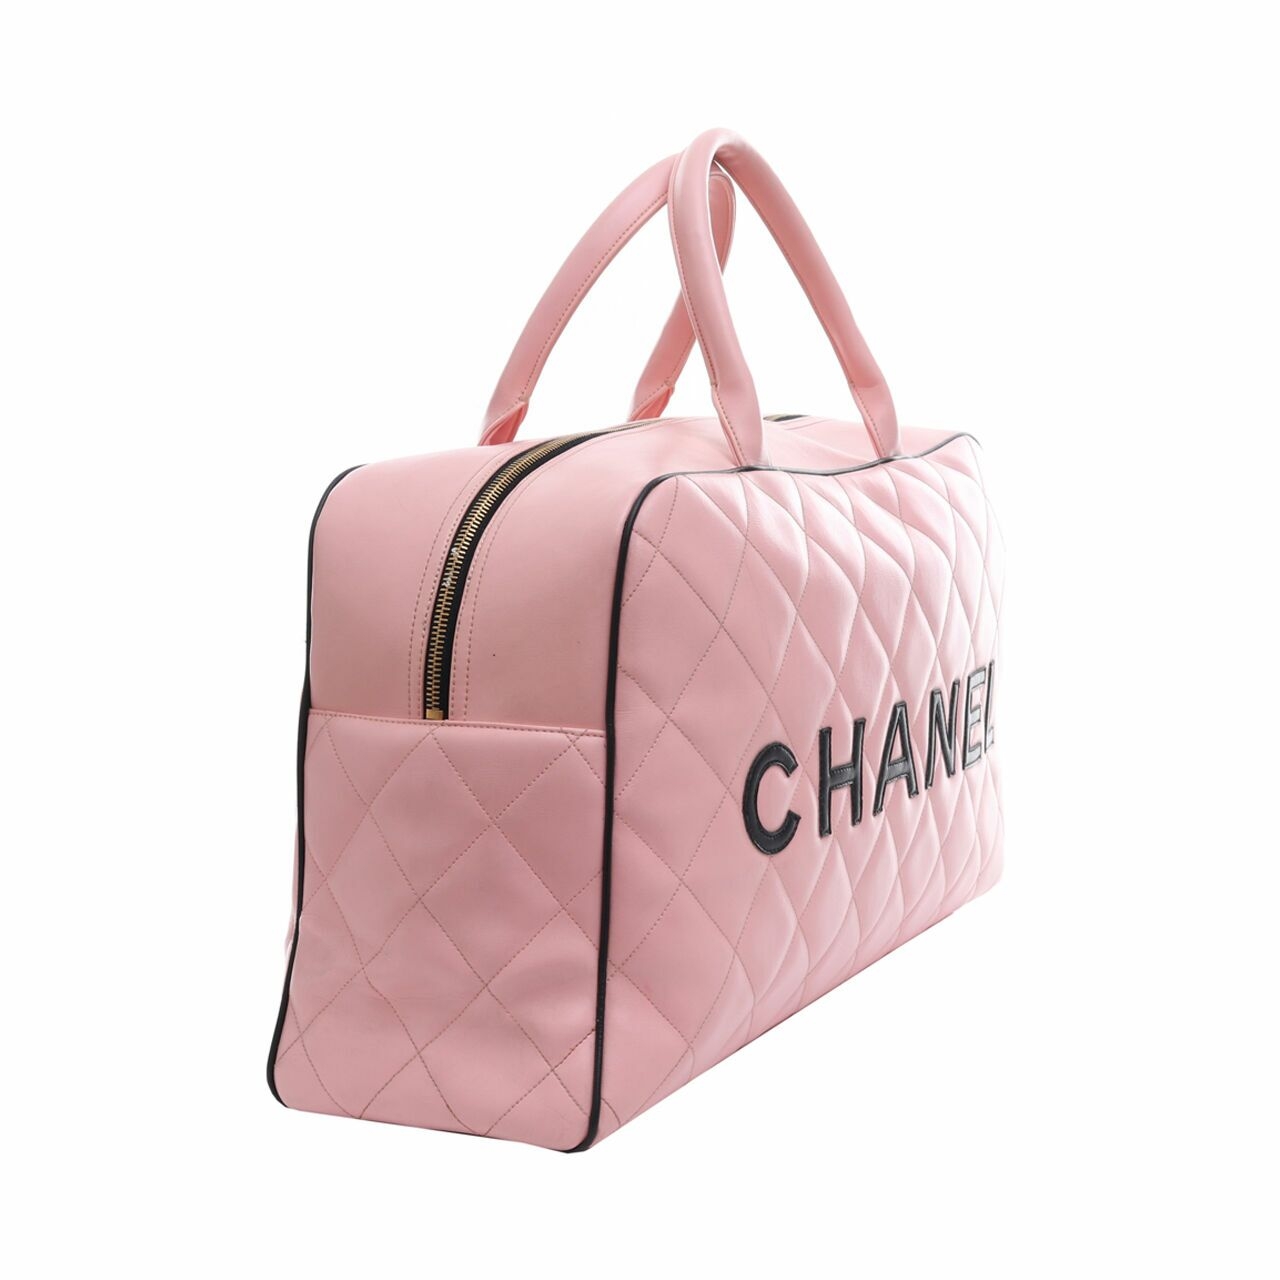 Chanel Tote Duffle Timeless Rare Duffel Overnight Pink Travel Bag